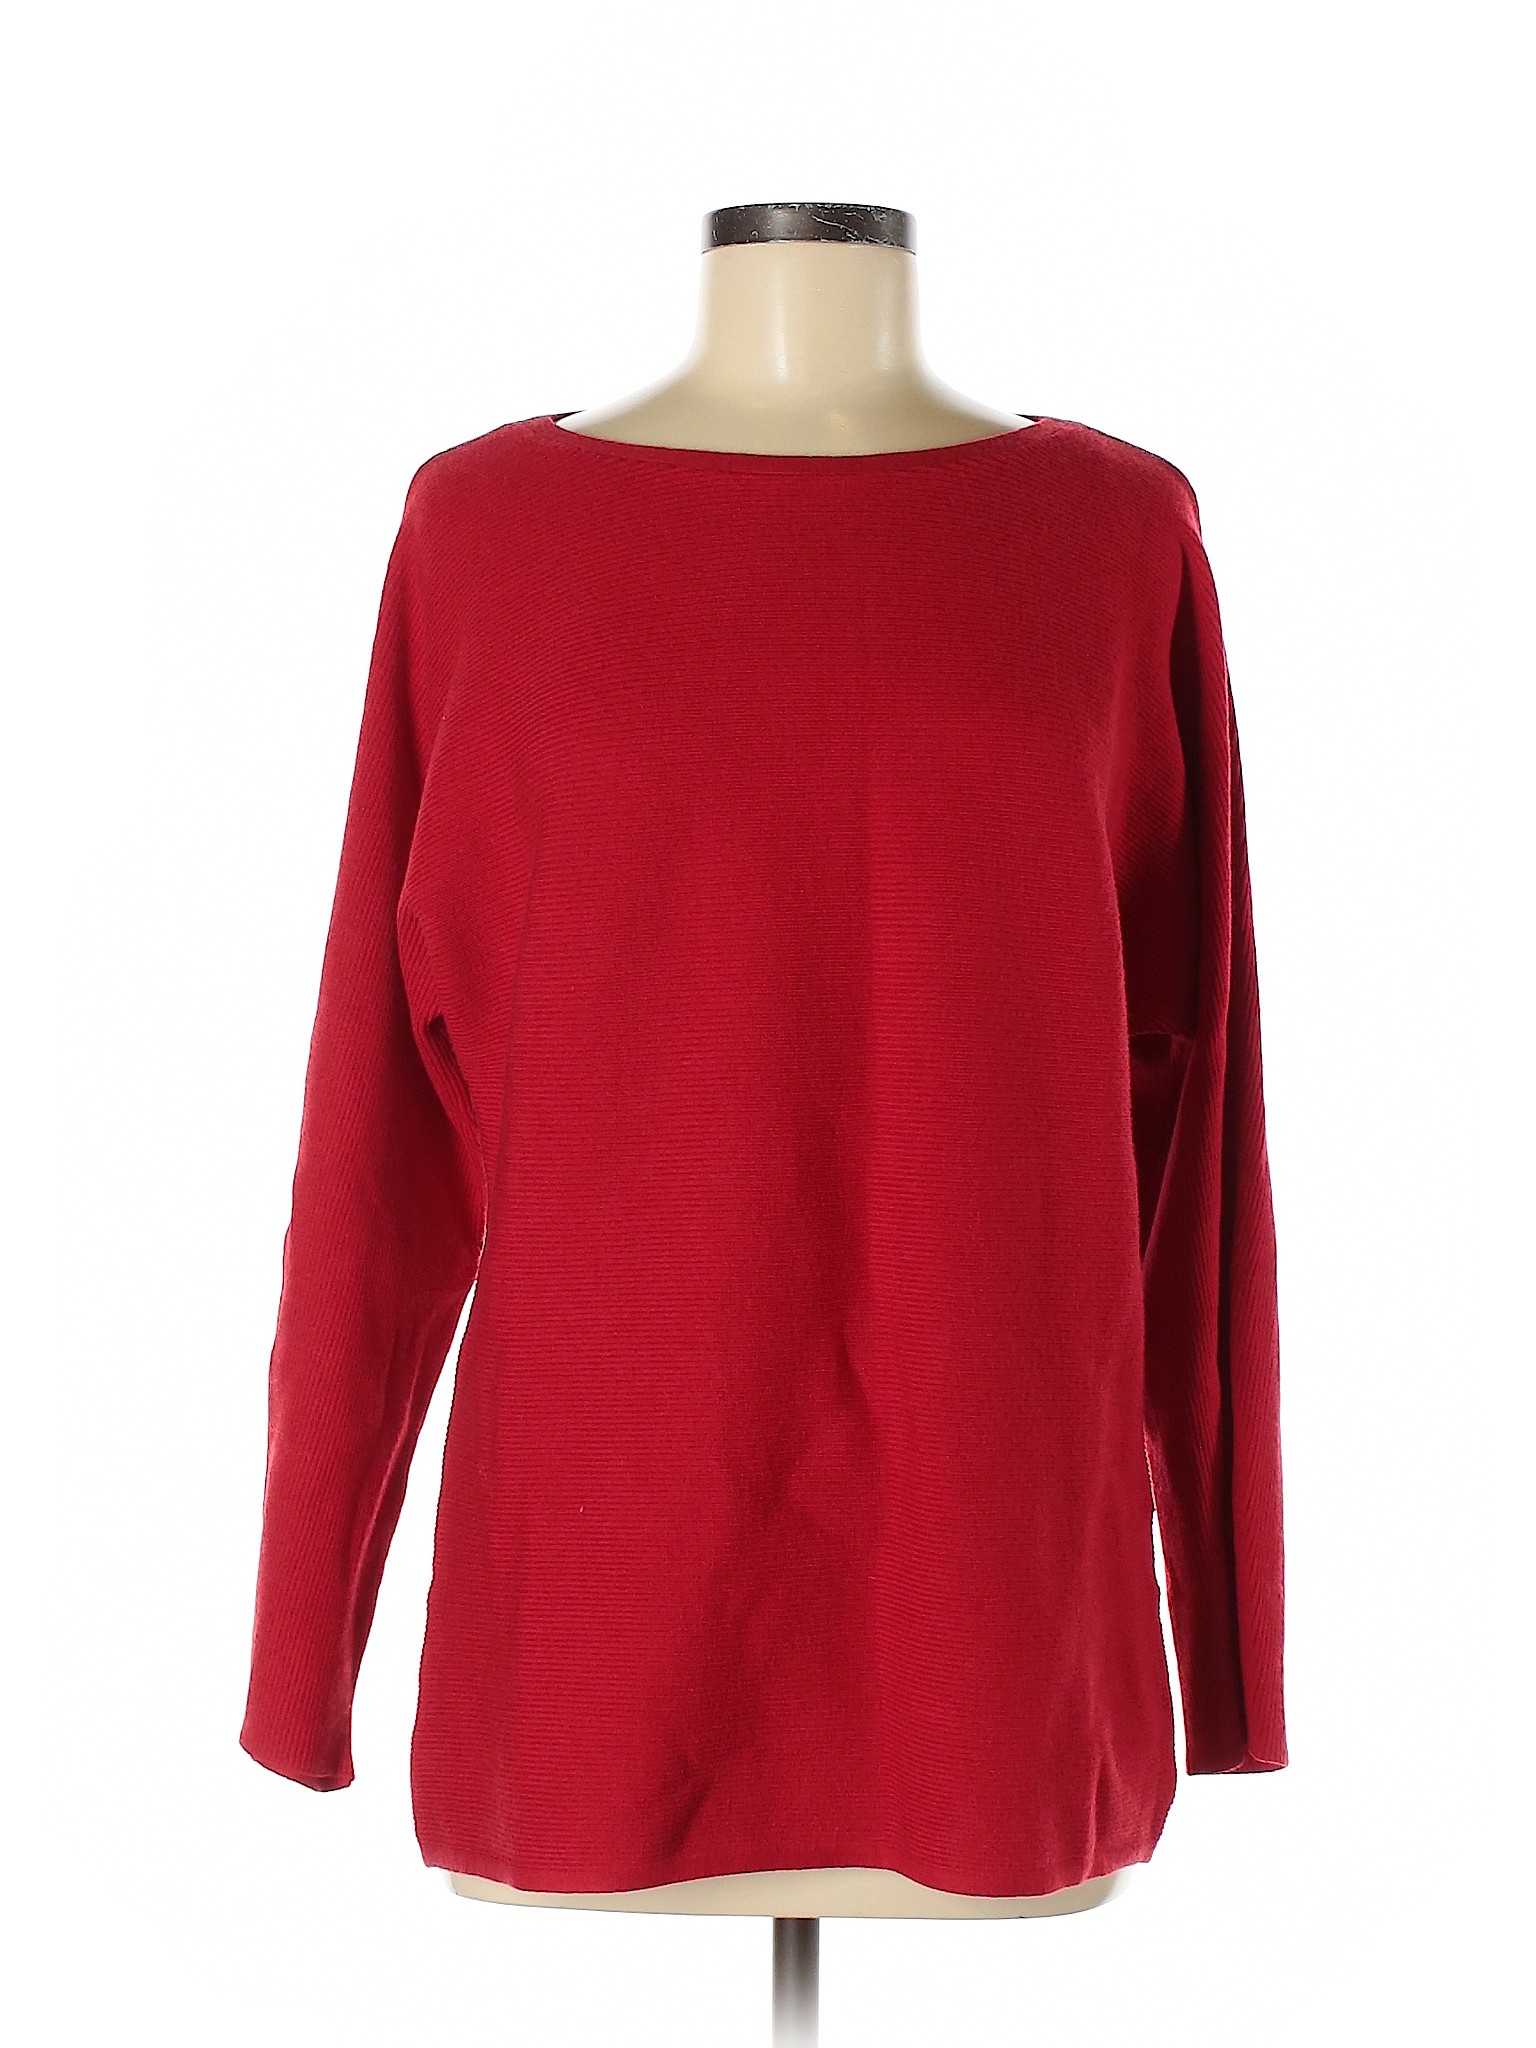 INC International Concepts Women Red Pullover Sweater M | eBay